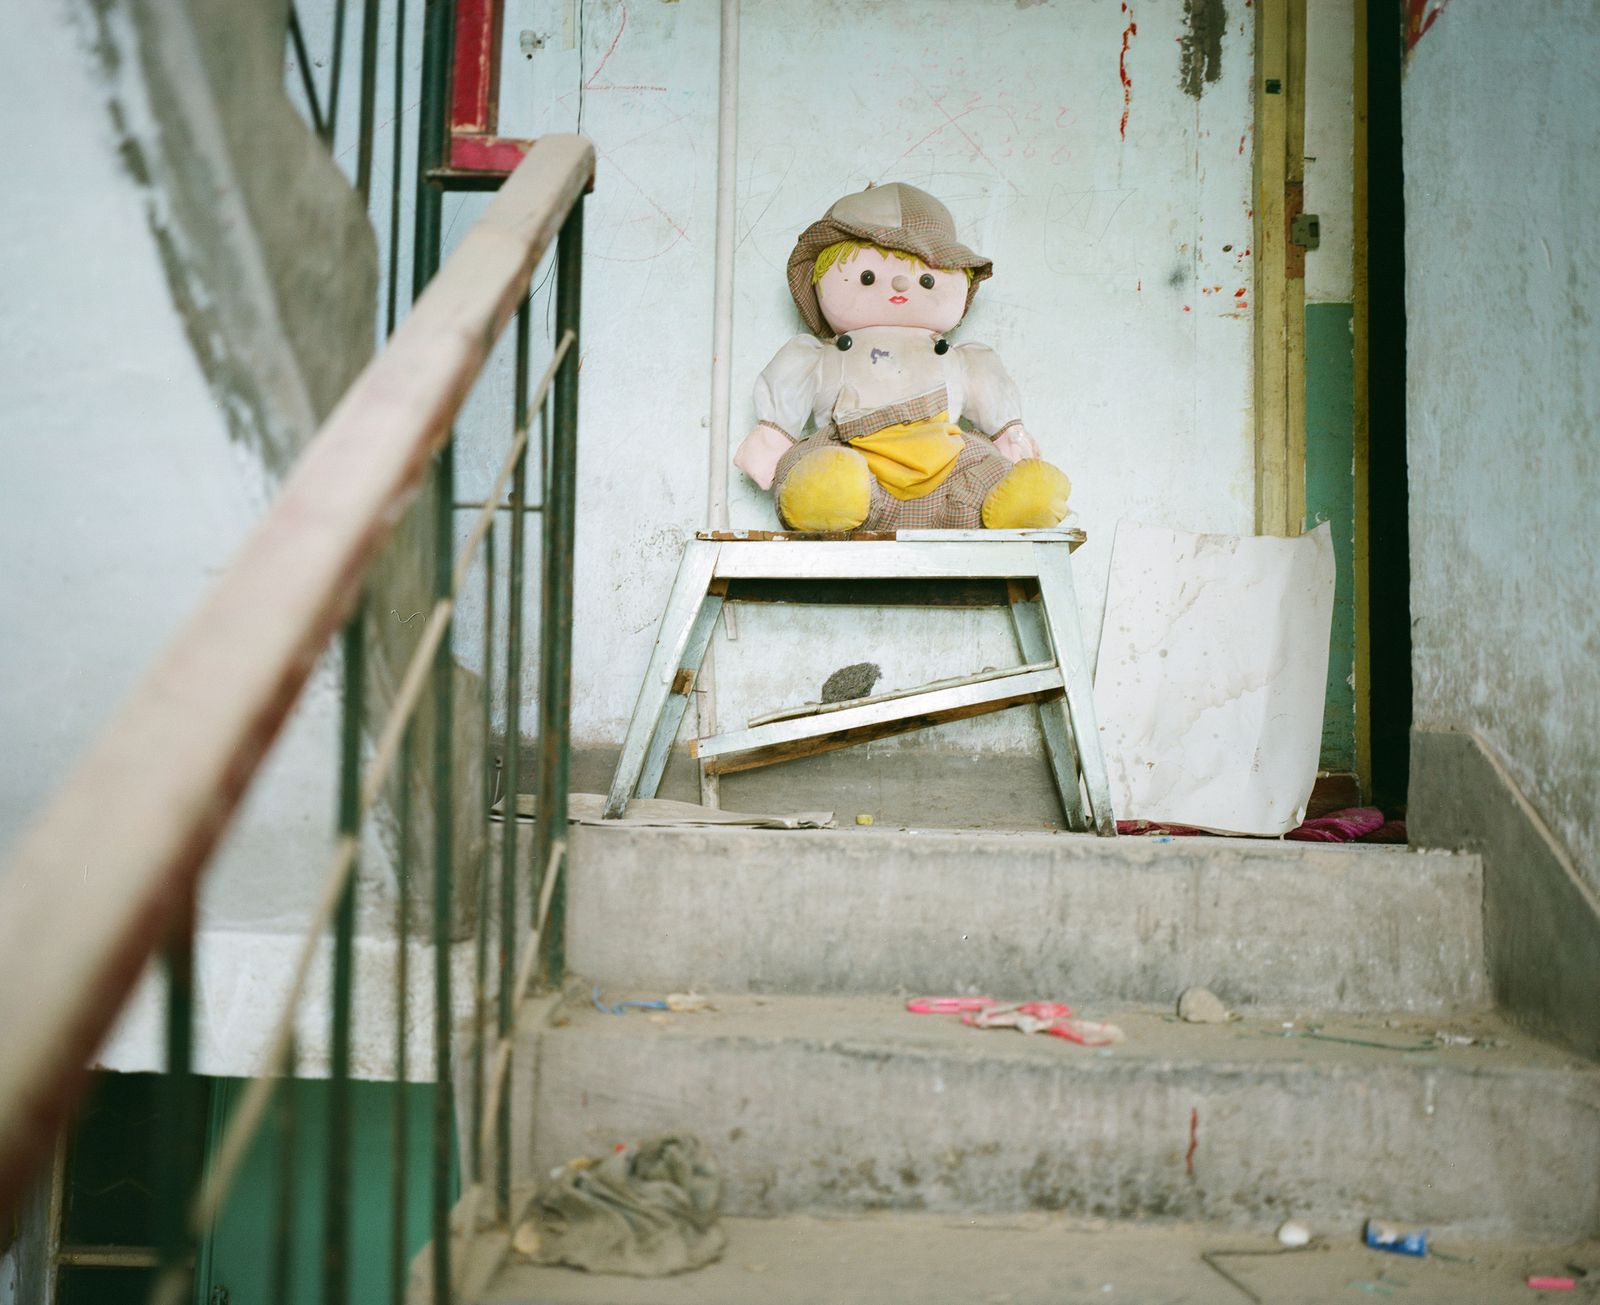 © Pan Wang - Image from the "Abandoned City" Yumen photography project